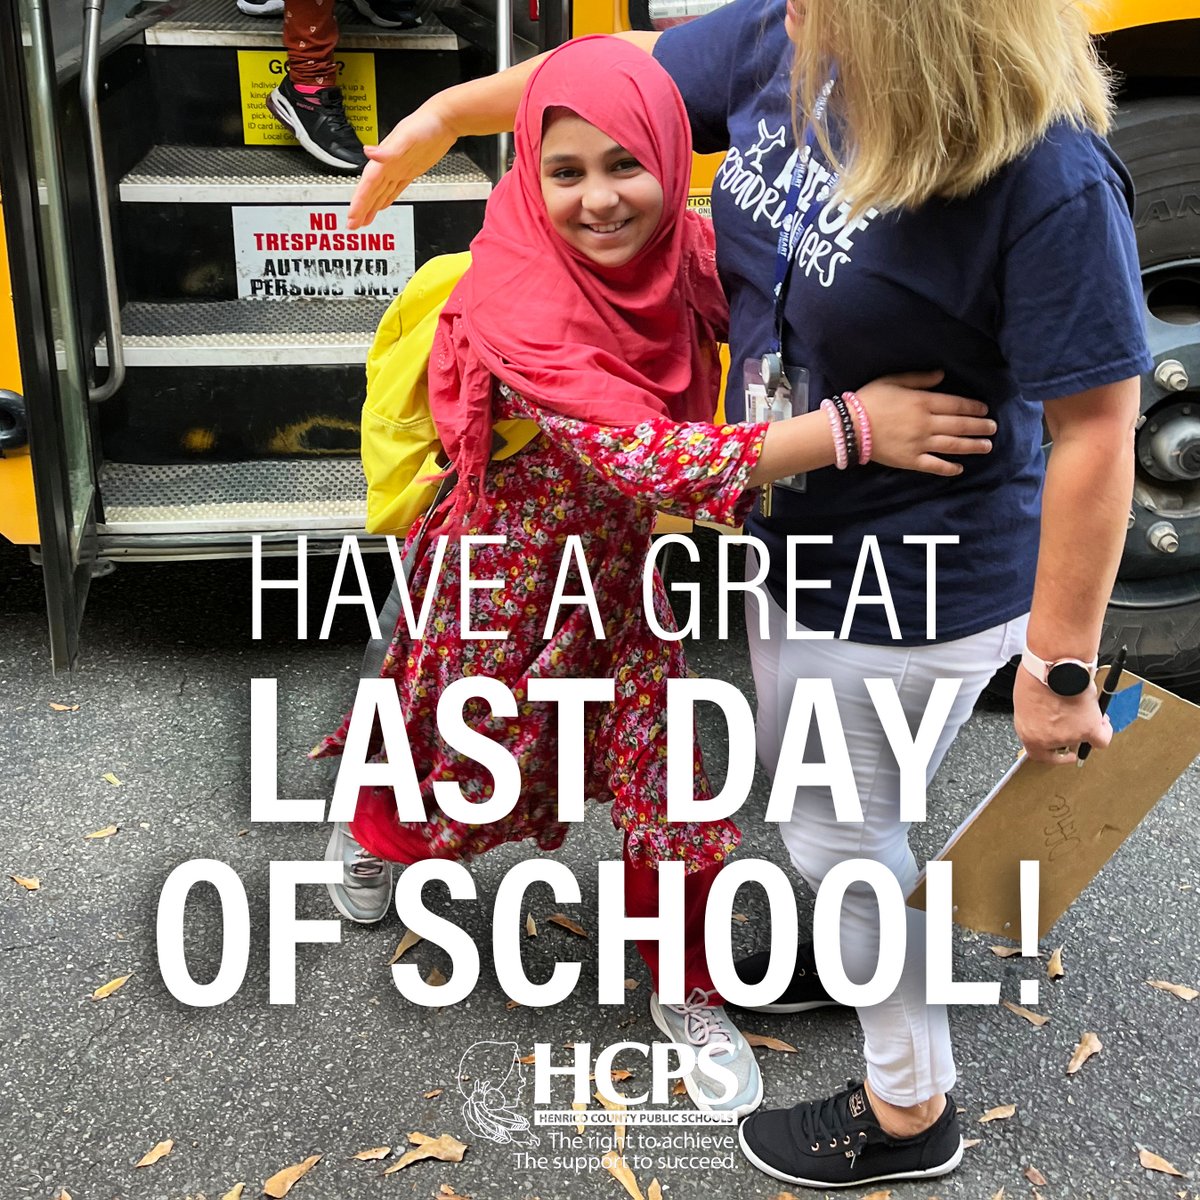 It's been a spectacular year, so let's have a spectacular last day! ☀️ Today is a student half day as we wrap up the 2023-24 school year at Henrico County Public Schools. We know there will be plenty of hugs and smiles to go around before dismissal. 😊